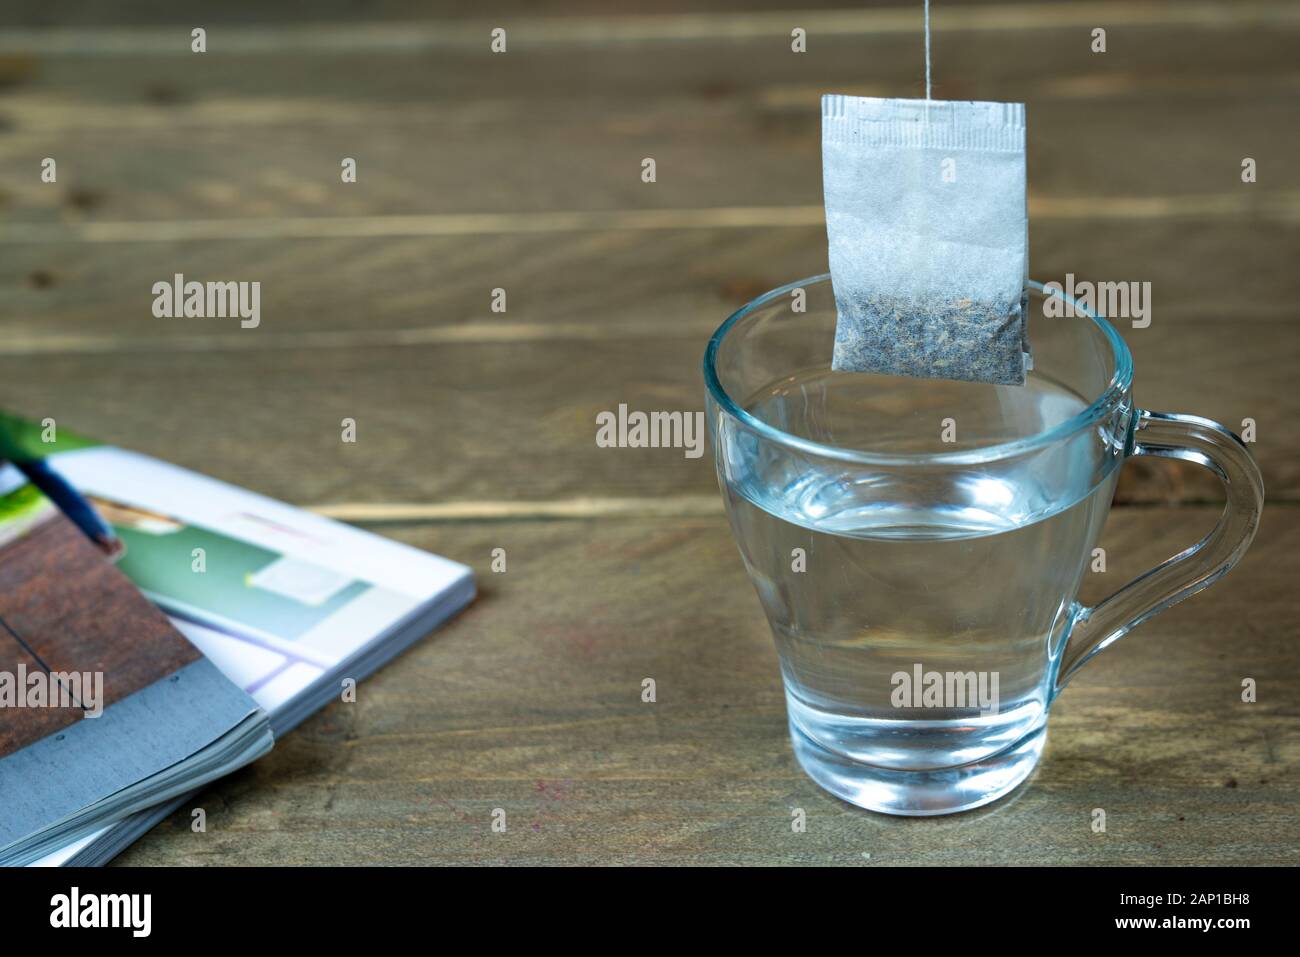 tea bag hanging over a hot glass of water. Preparation of making tea. Stock Photo